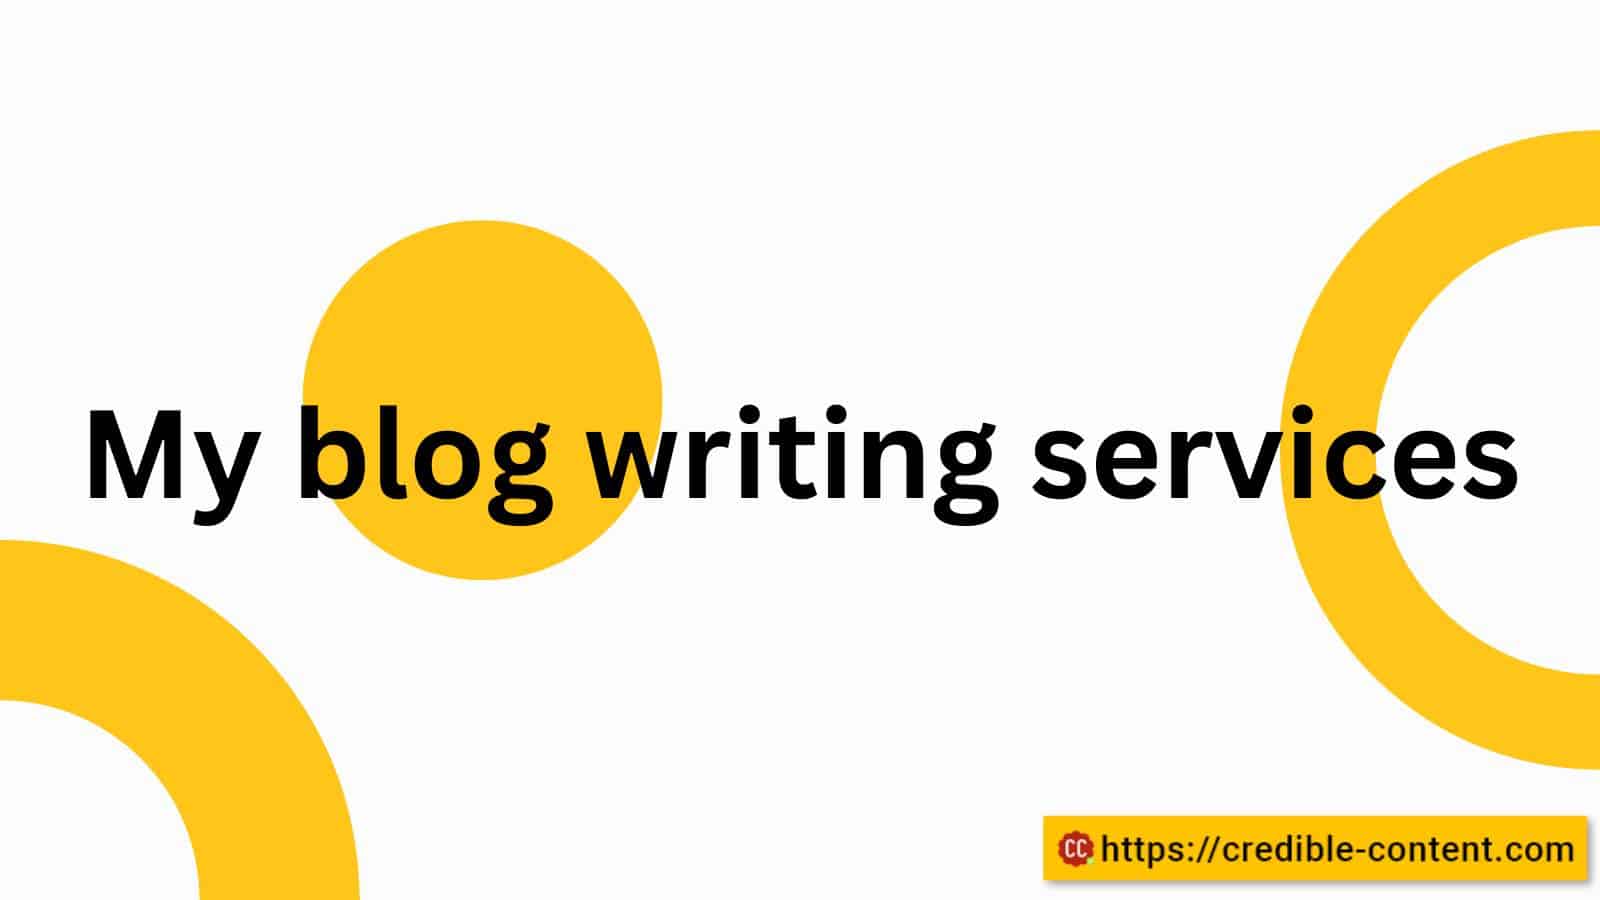 My blog writing services